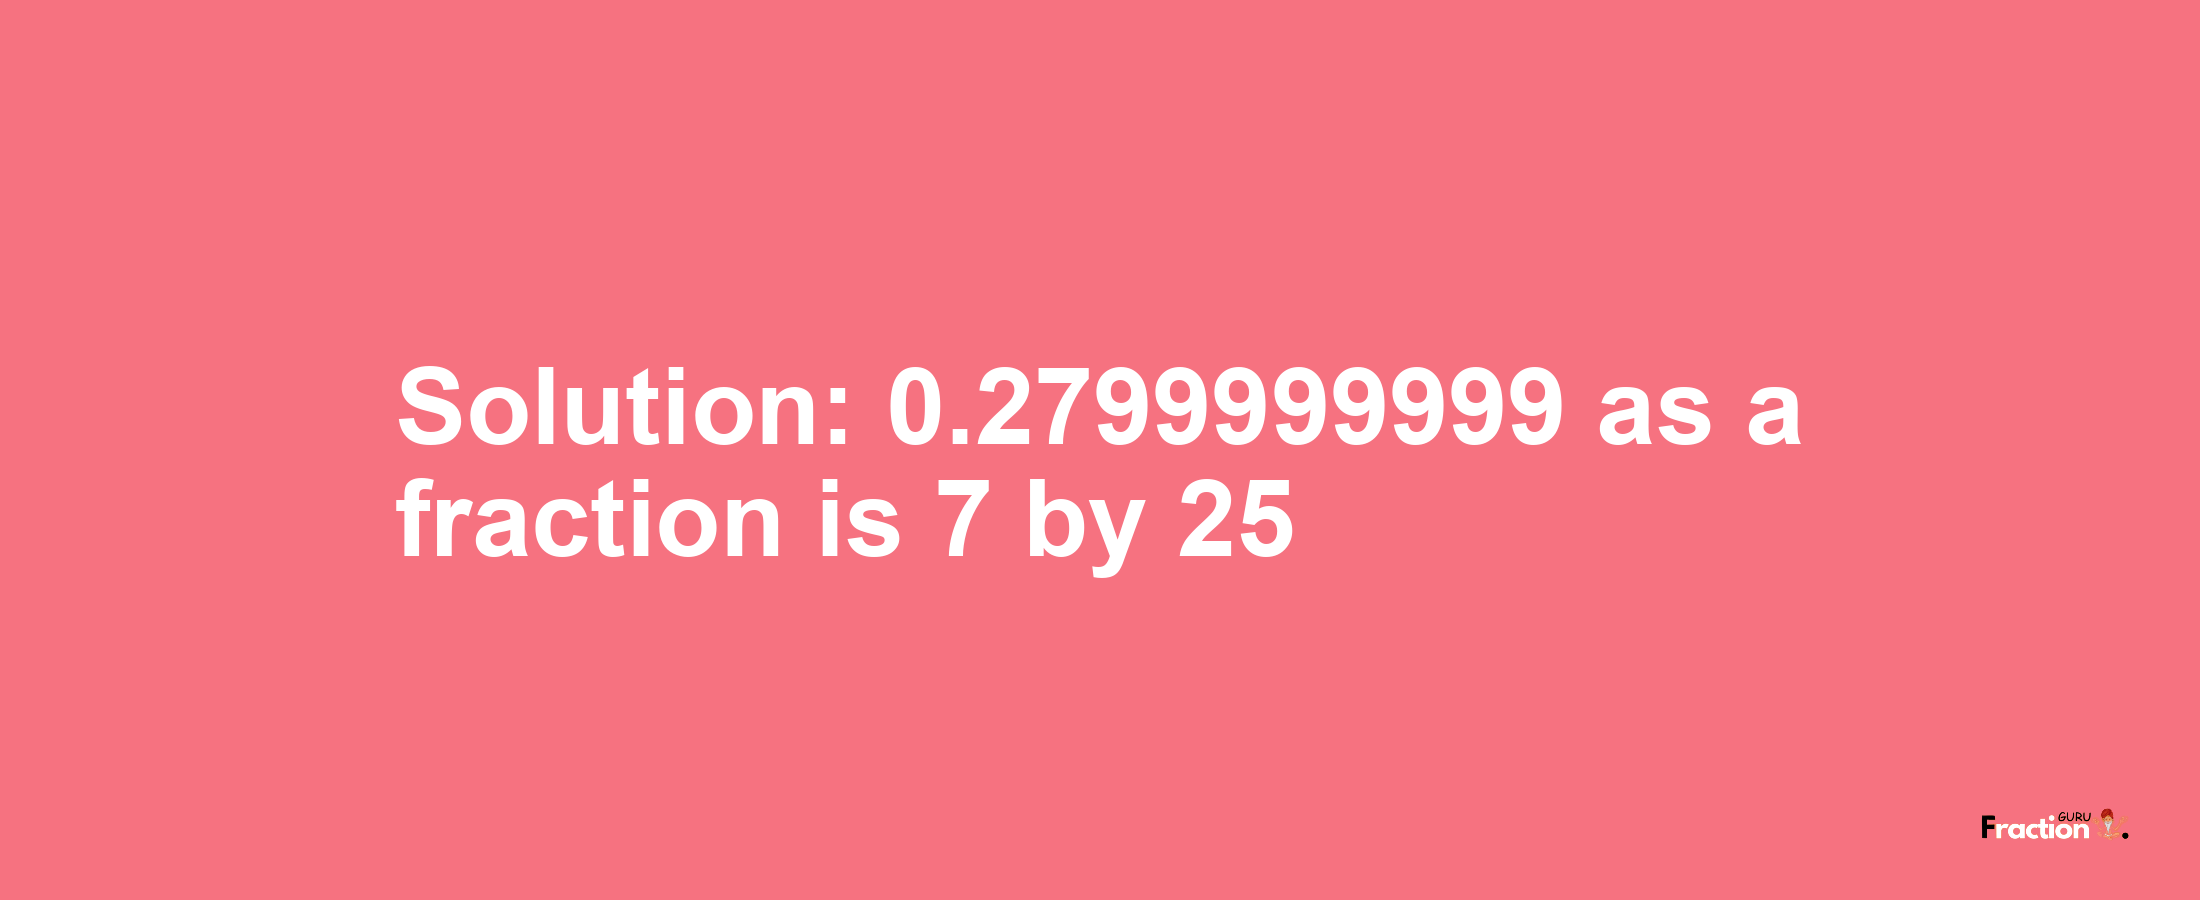 Solution:0.2799999999 as a fraction is 7/25